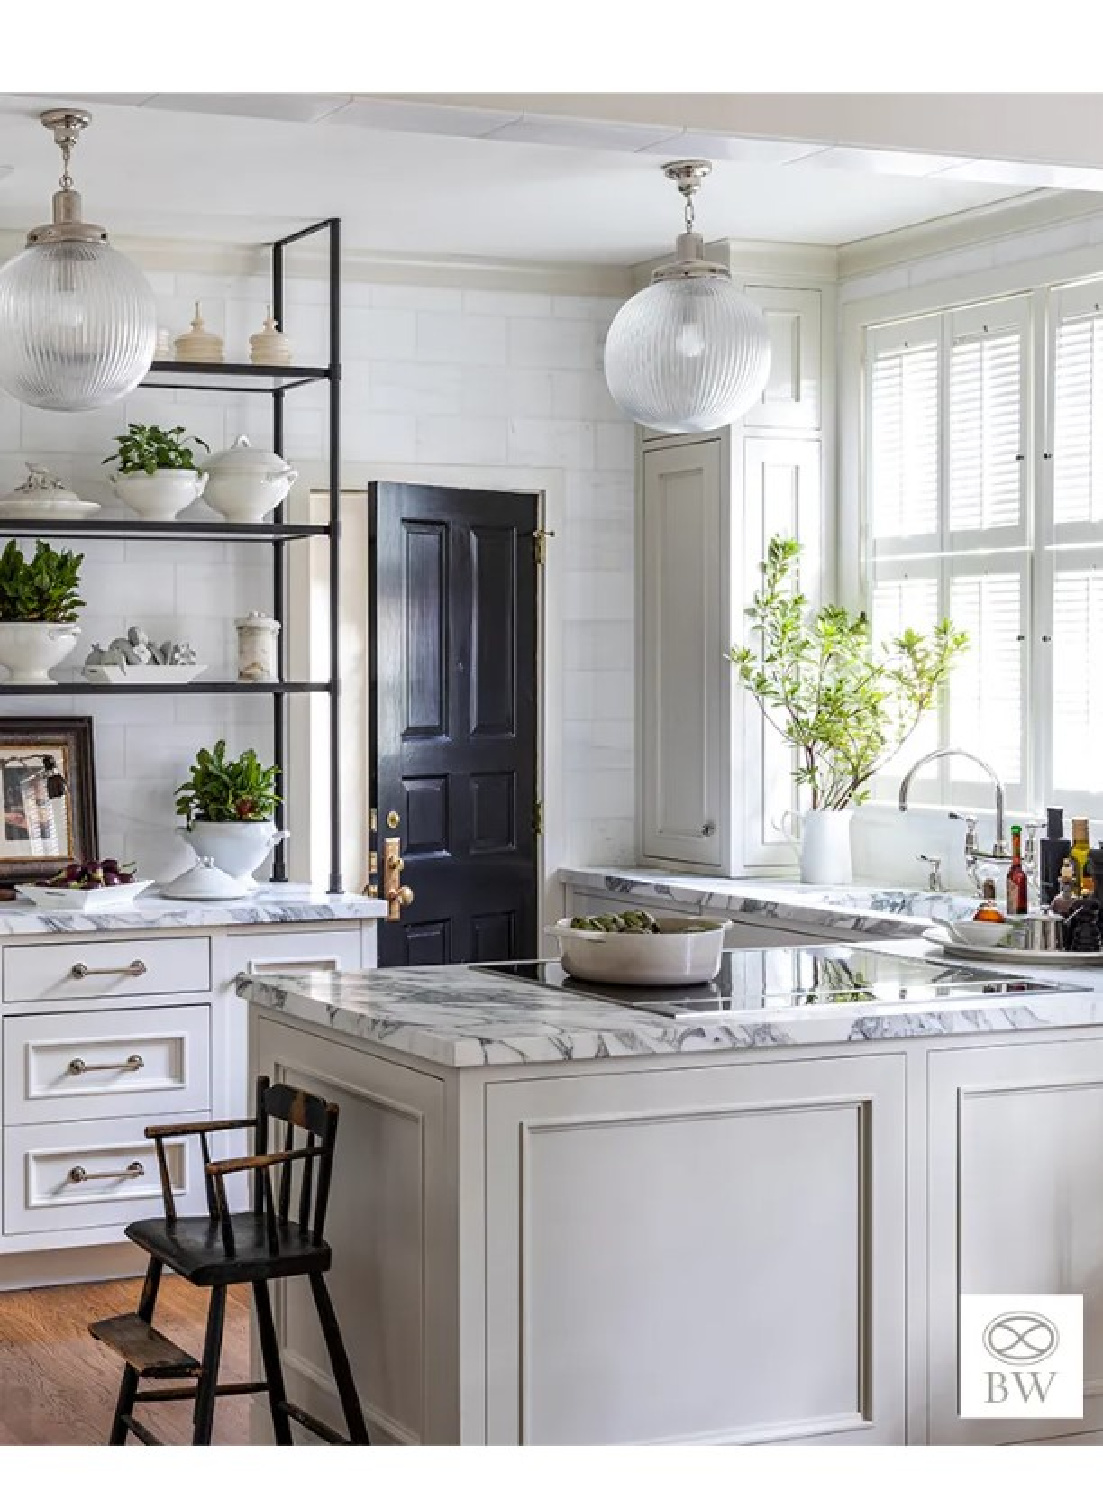 Beautiful kitchen design from Beth Webb's Muscogee project - photo by Lisa Romerein. #bethwebb #timelessinteriors